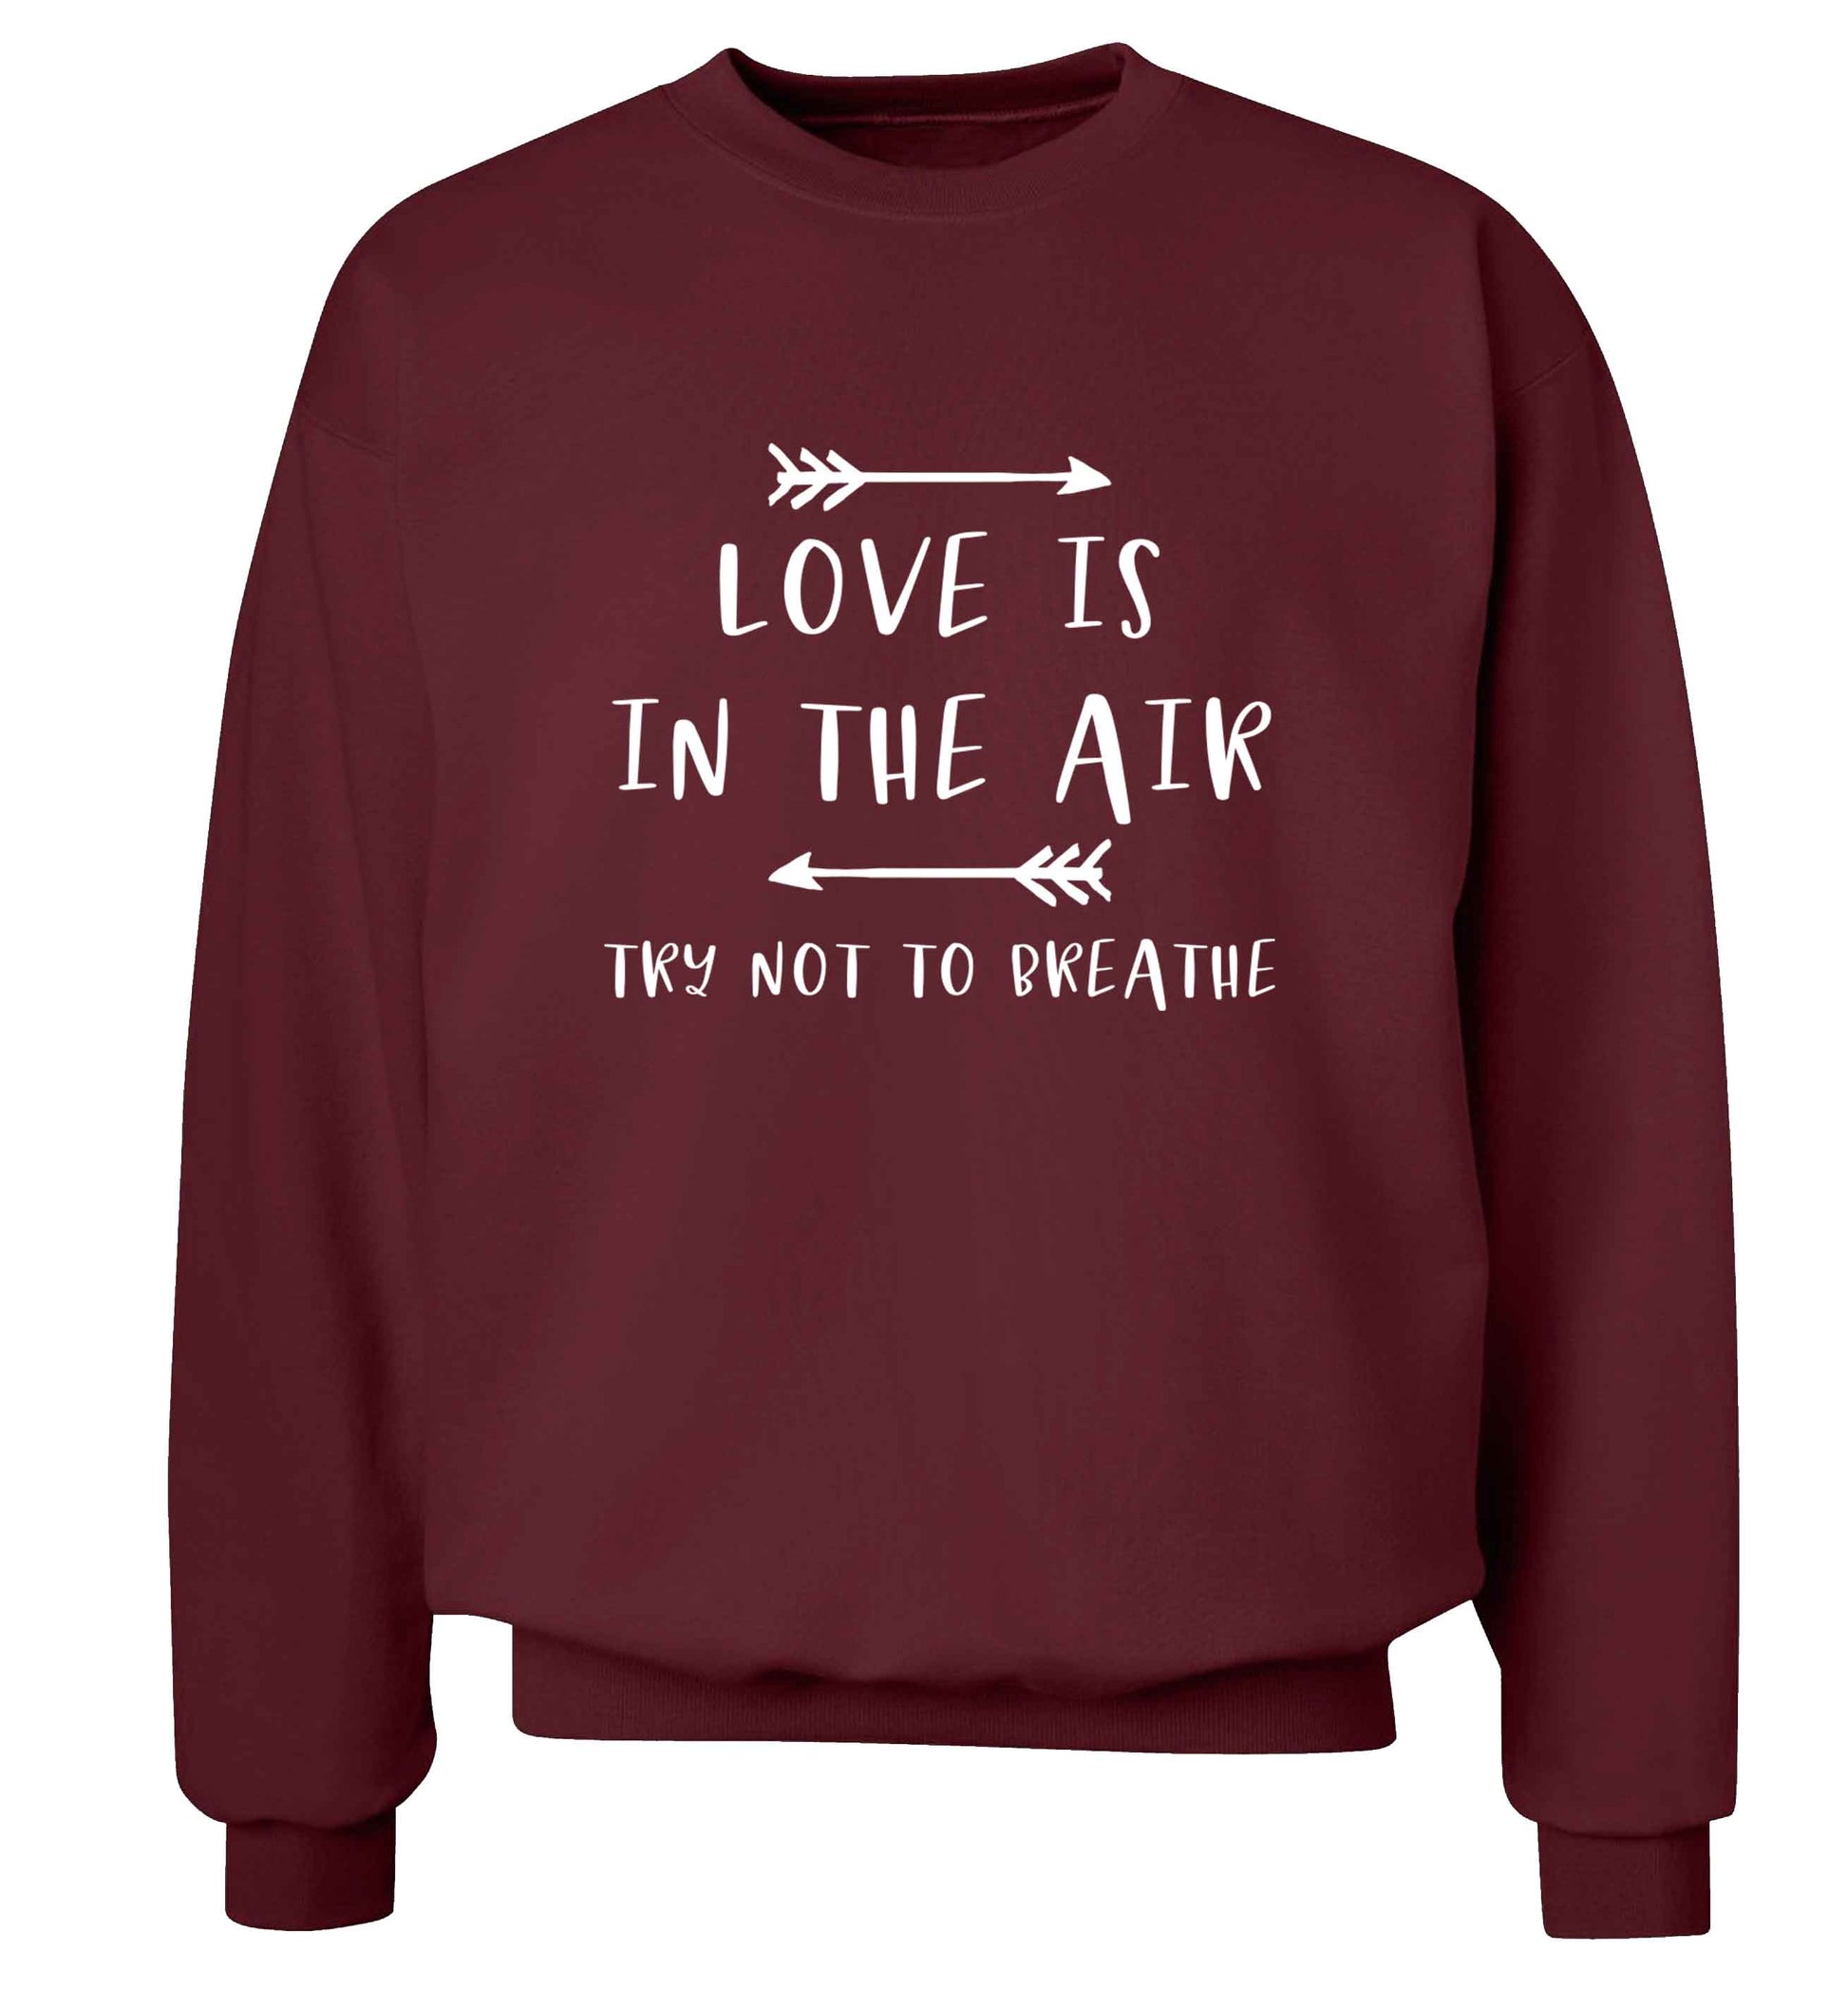 Love is in the air try not to breathe adult's unisex maroon sweater 2XL